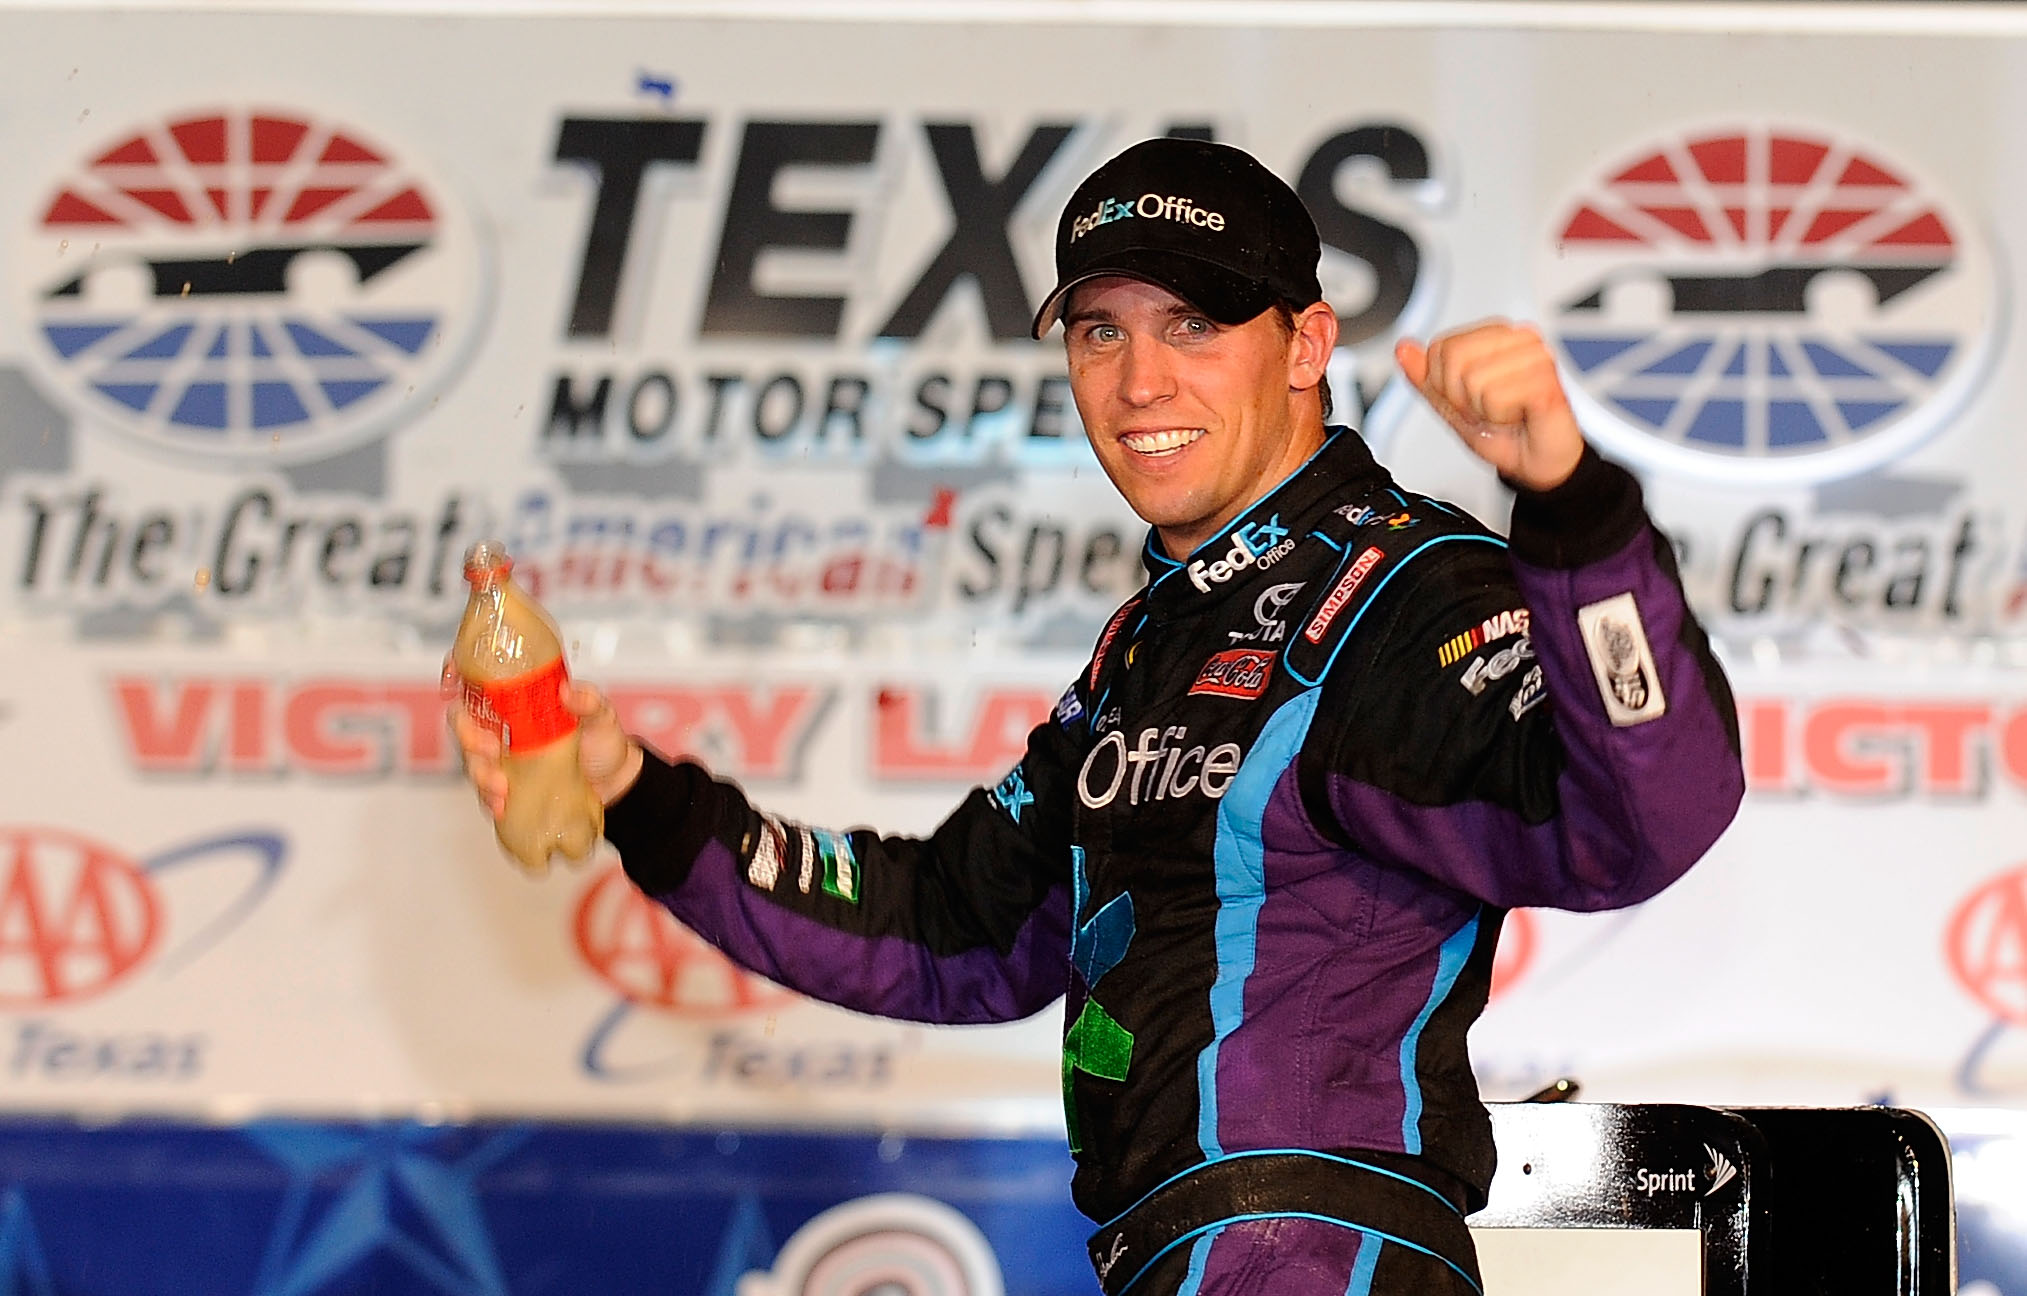 FORT WORTH, TX - NOVEMBER 07:  Denny Hamlin, driver of the #11 FedEx Office Toyota, celebrates in Victory Lane after winning the NASCAR Sprint Cup Series AAA Texas 500 at Texas Motor Speedway on November 7, 2010 in Fort Worth, Texas.  (Photo by Rusty Jarr